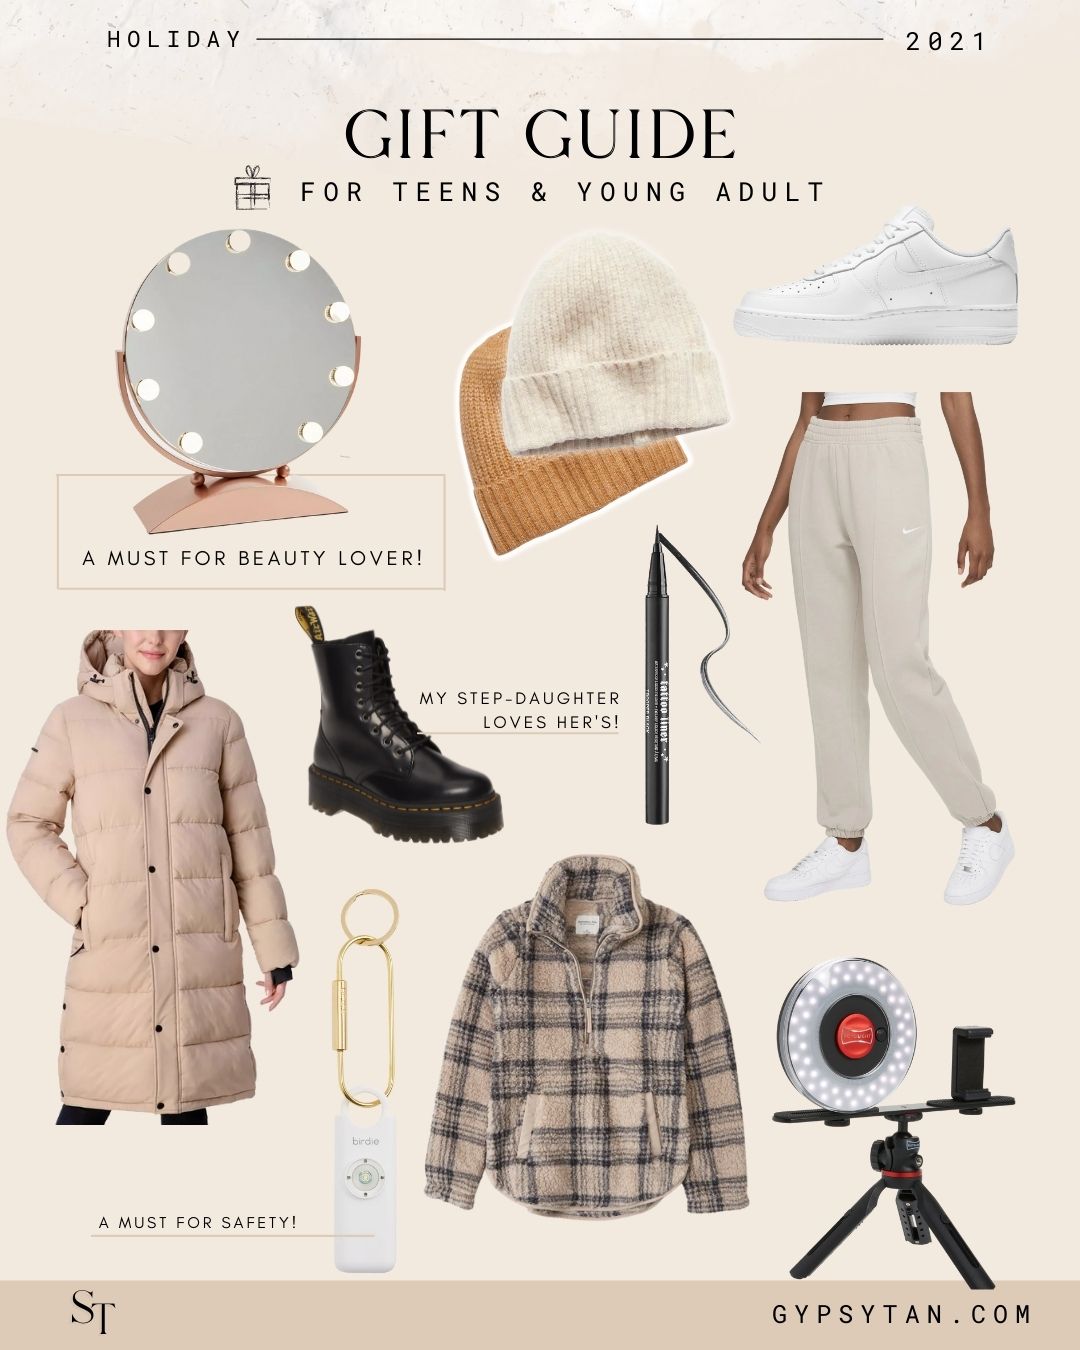 Holiday Gift Guide 2021 - Gifts for Teens